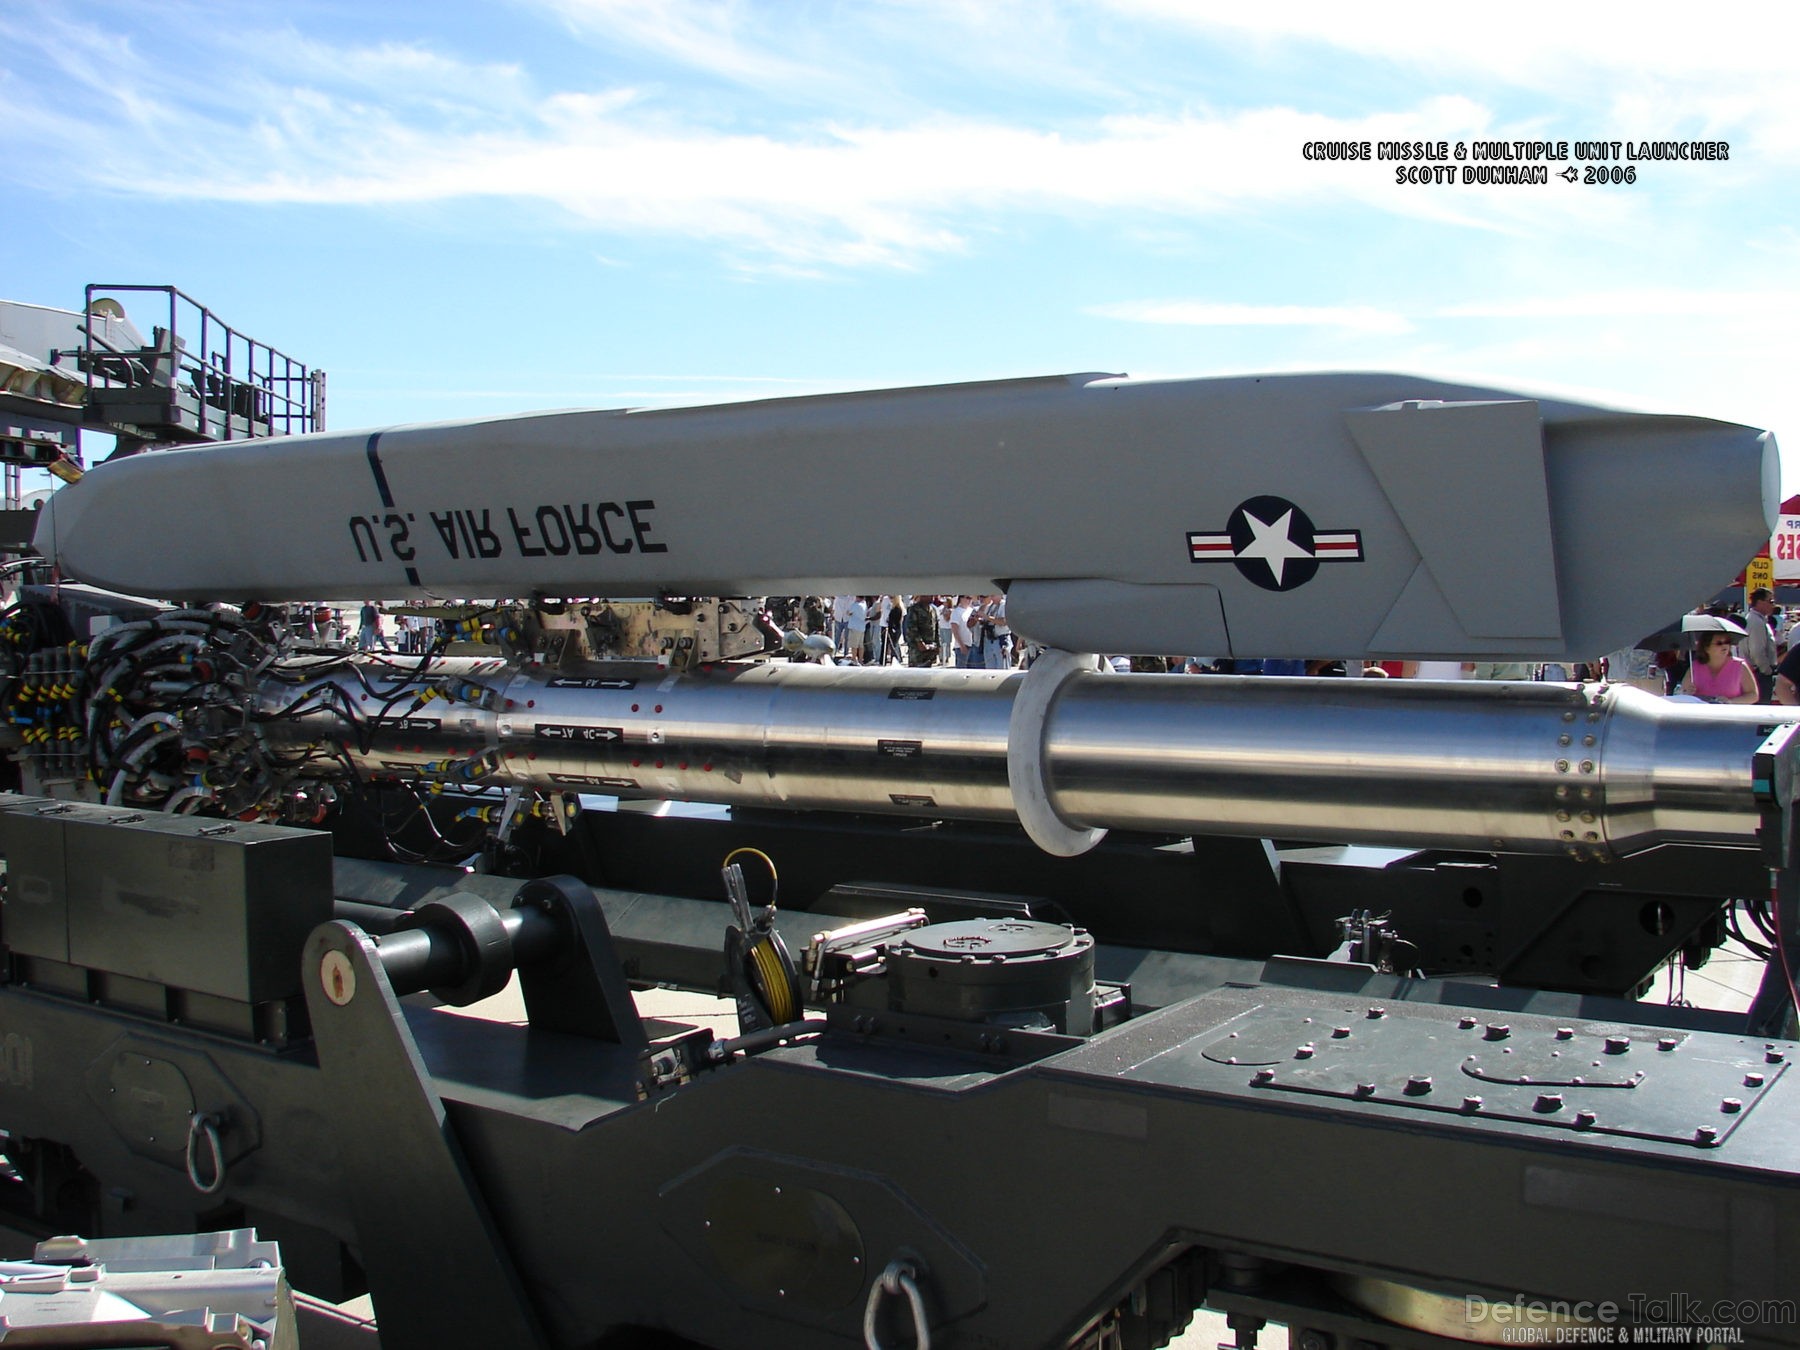 USAF Cruise Missile with Rotating Multiple Unit Launcher